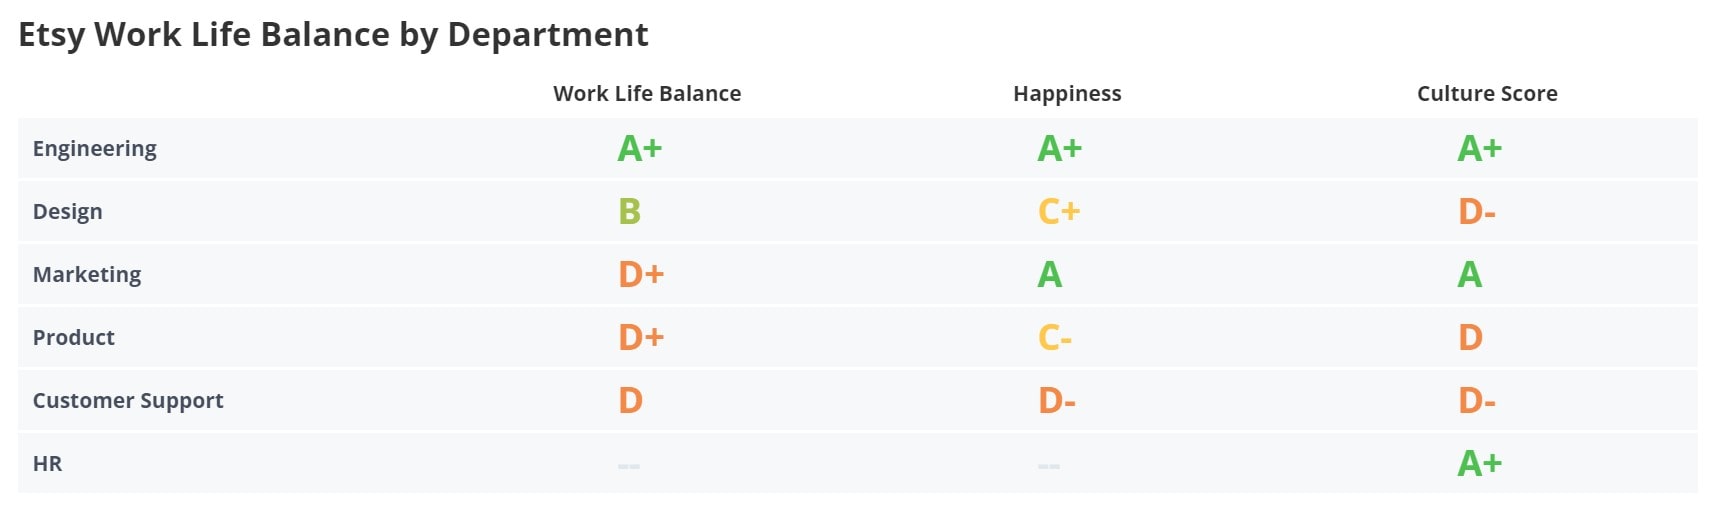 Etsy Work-Life Balance by Department